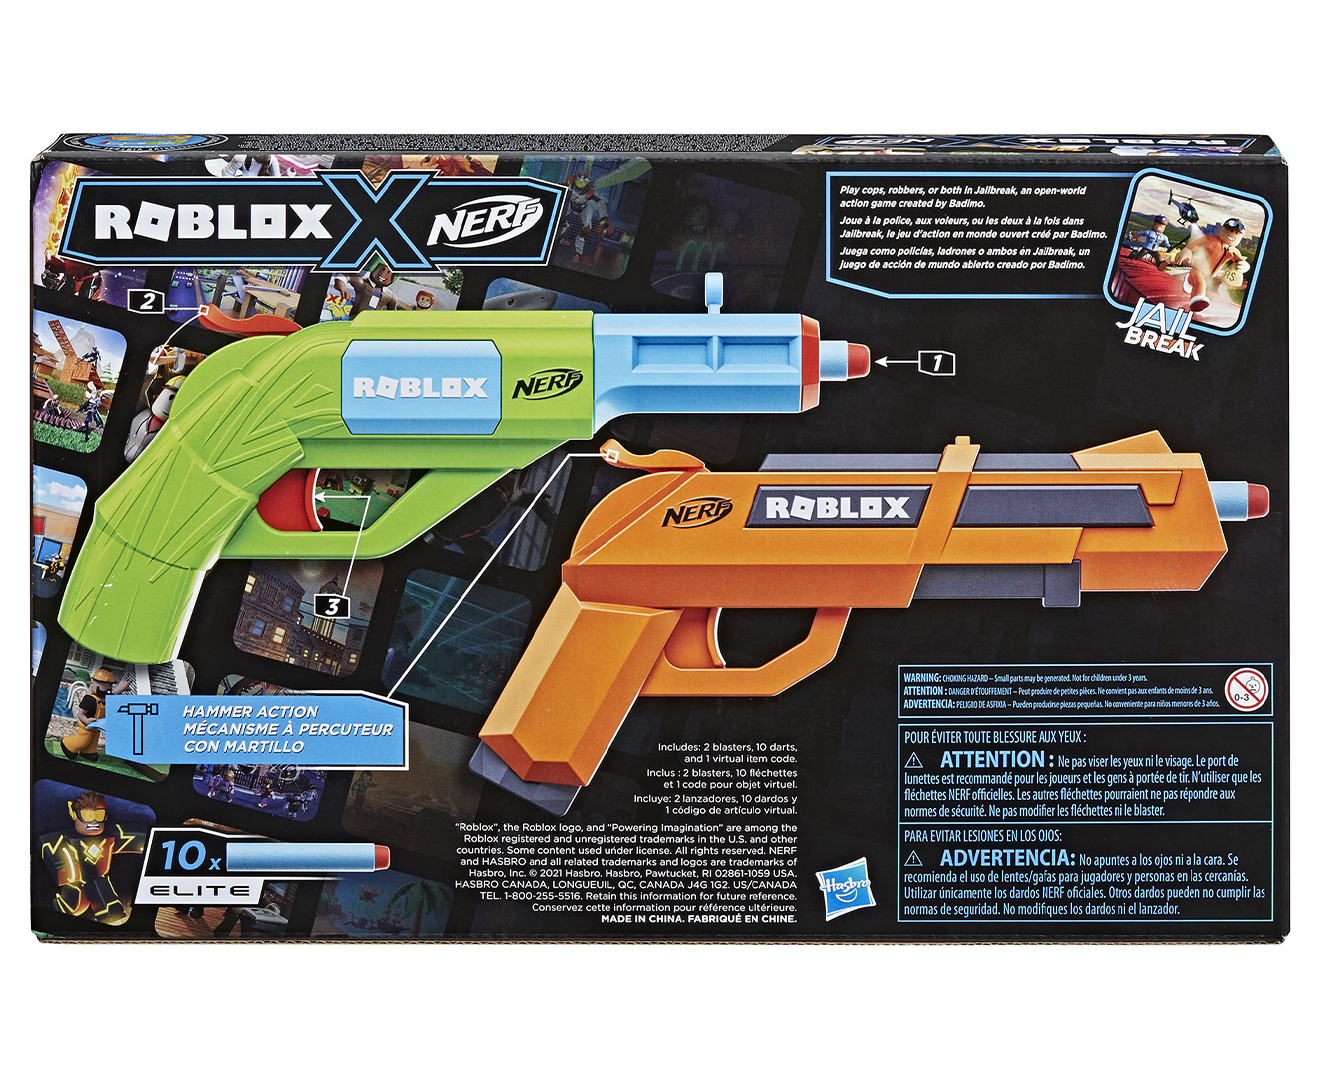 NERF ROBLOX ADOPT Me Bees Blaster 8+ Toy WithCode To Unlock In